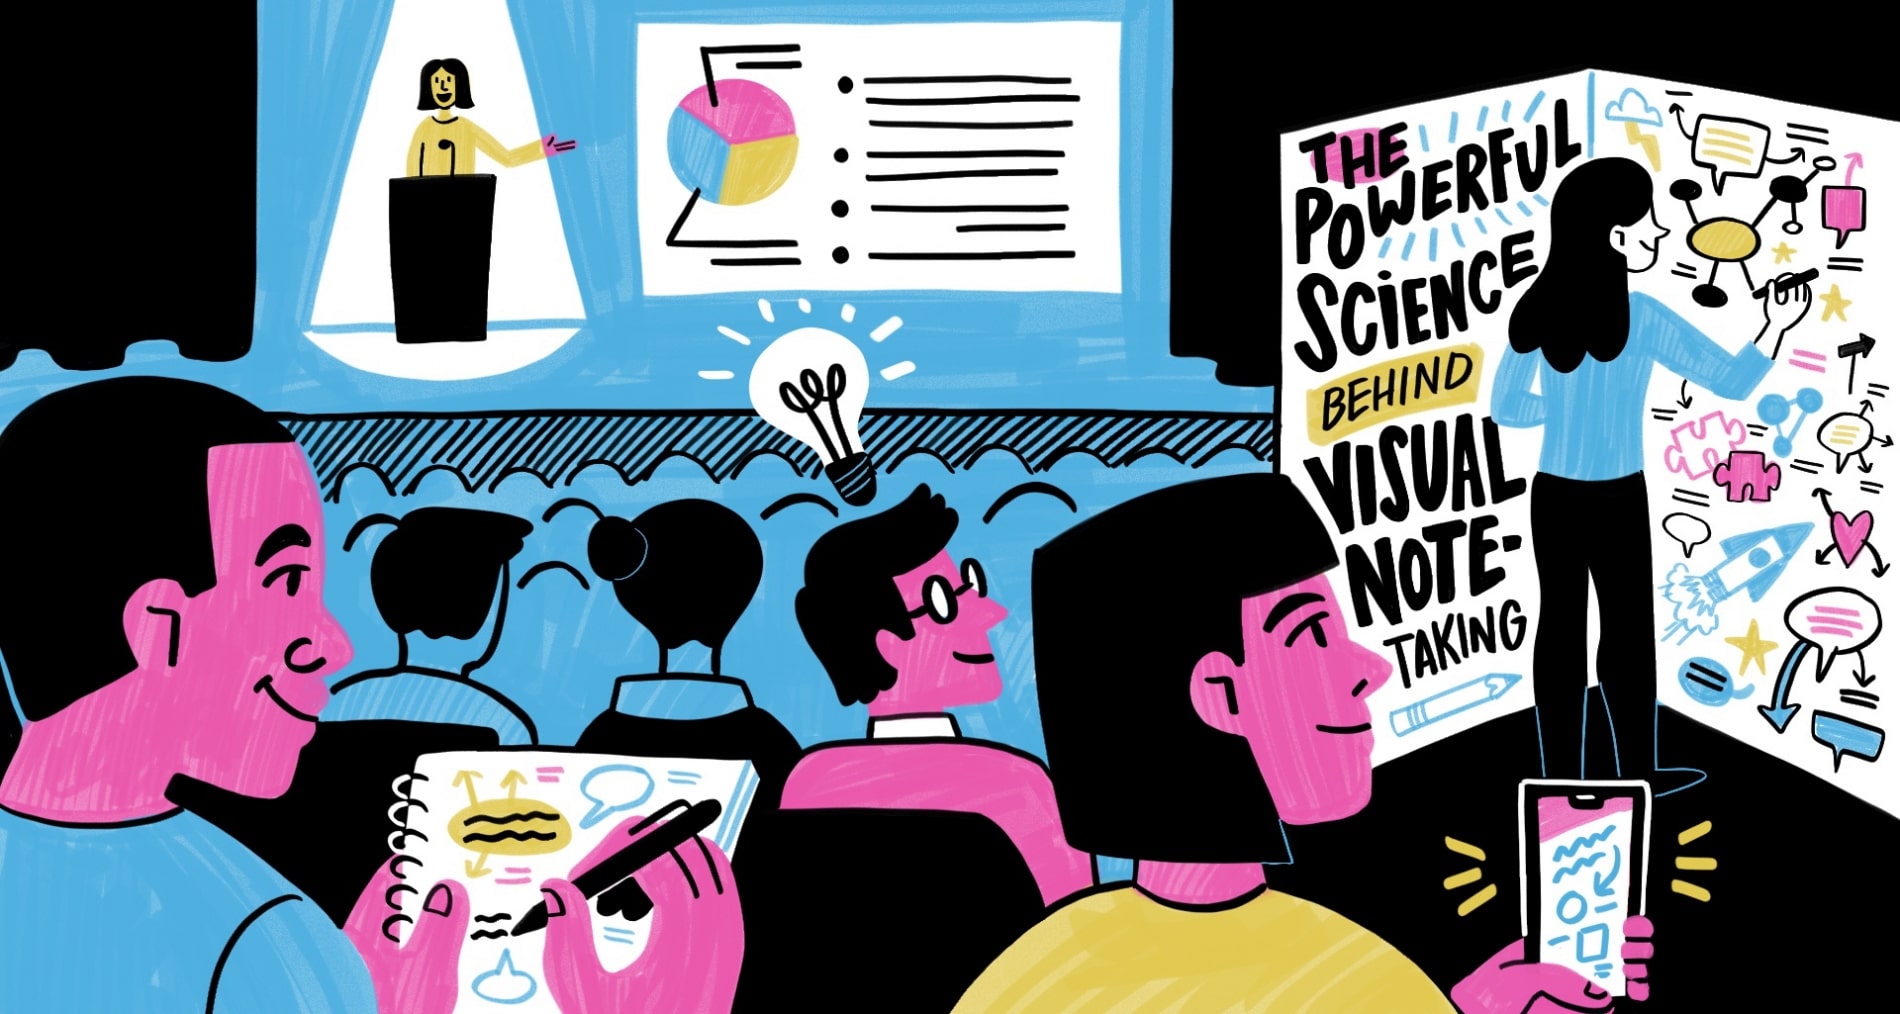 The Powerful Science Behind Visual Note-Taking